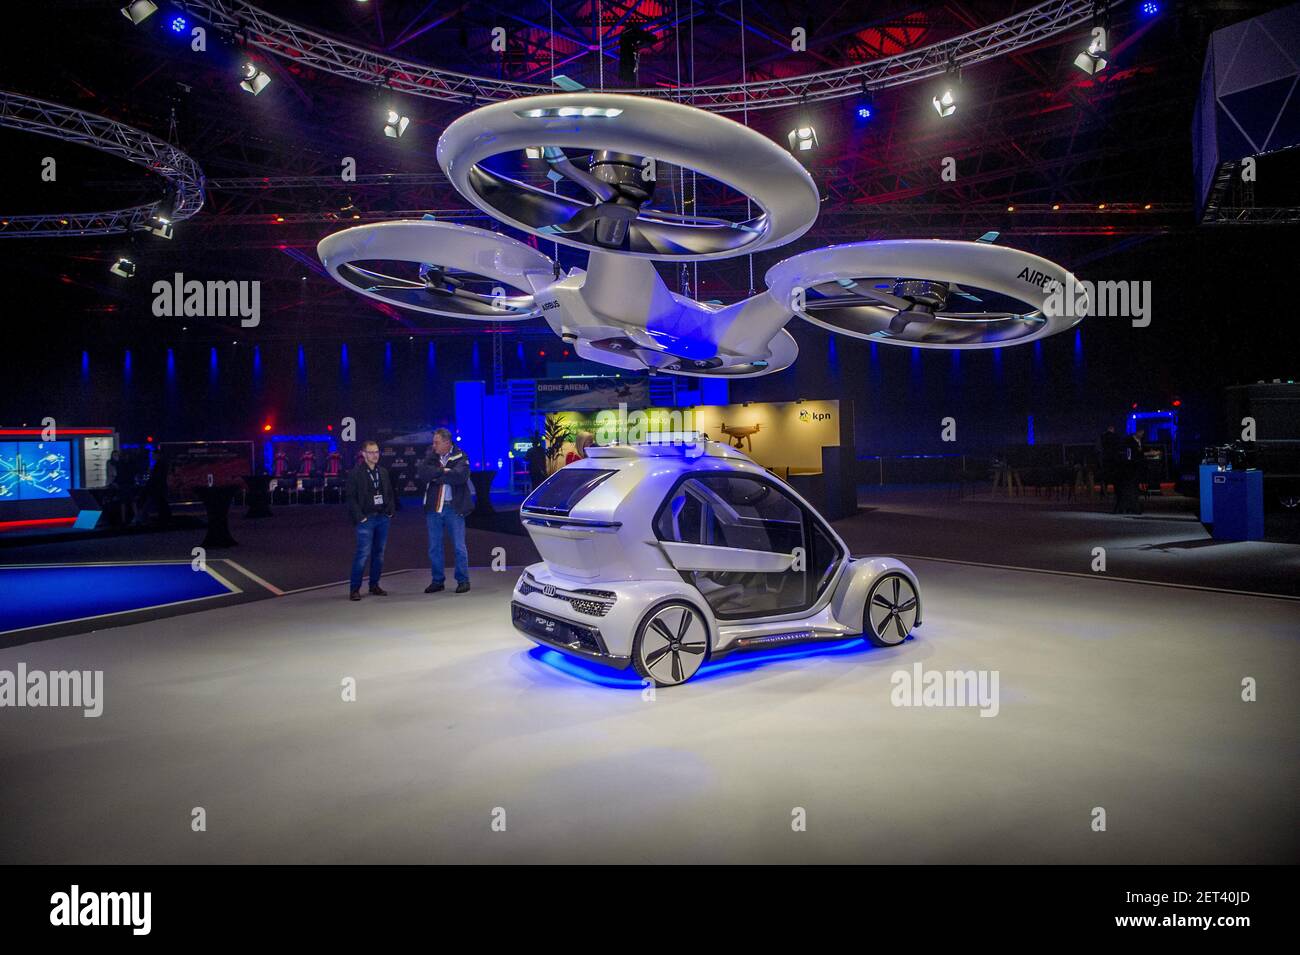 AMSTERDAM - 29 November 2018 During the Amsterdam Drone Week, Airbus shows  its latest drone design designed as an alternative to taxis or public  transport. This drone can transport two people through